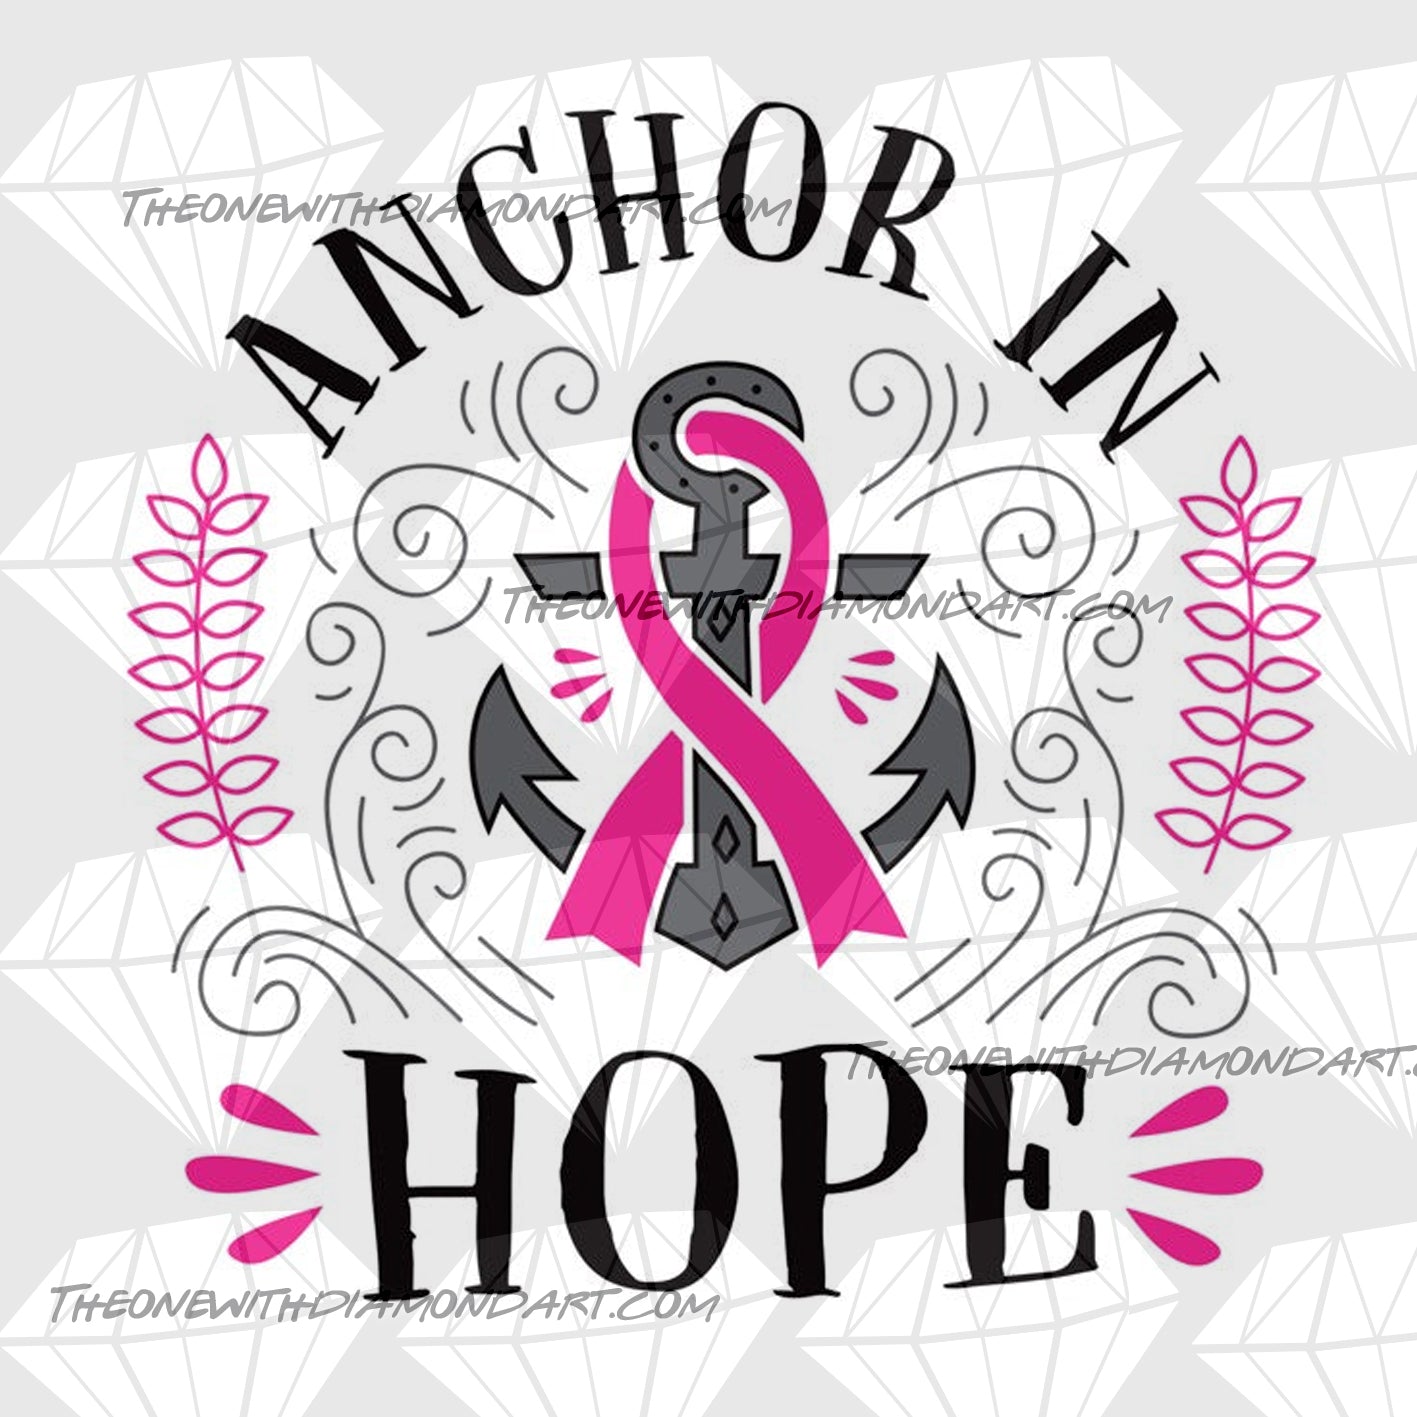 Anchor In Hope